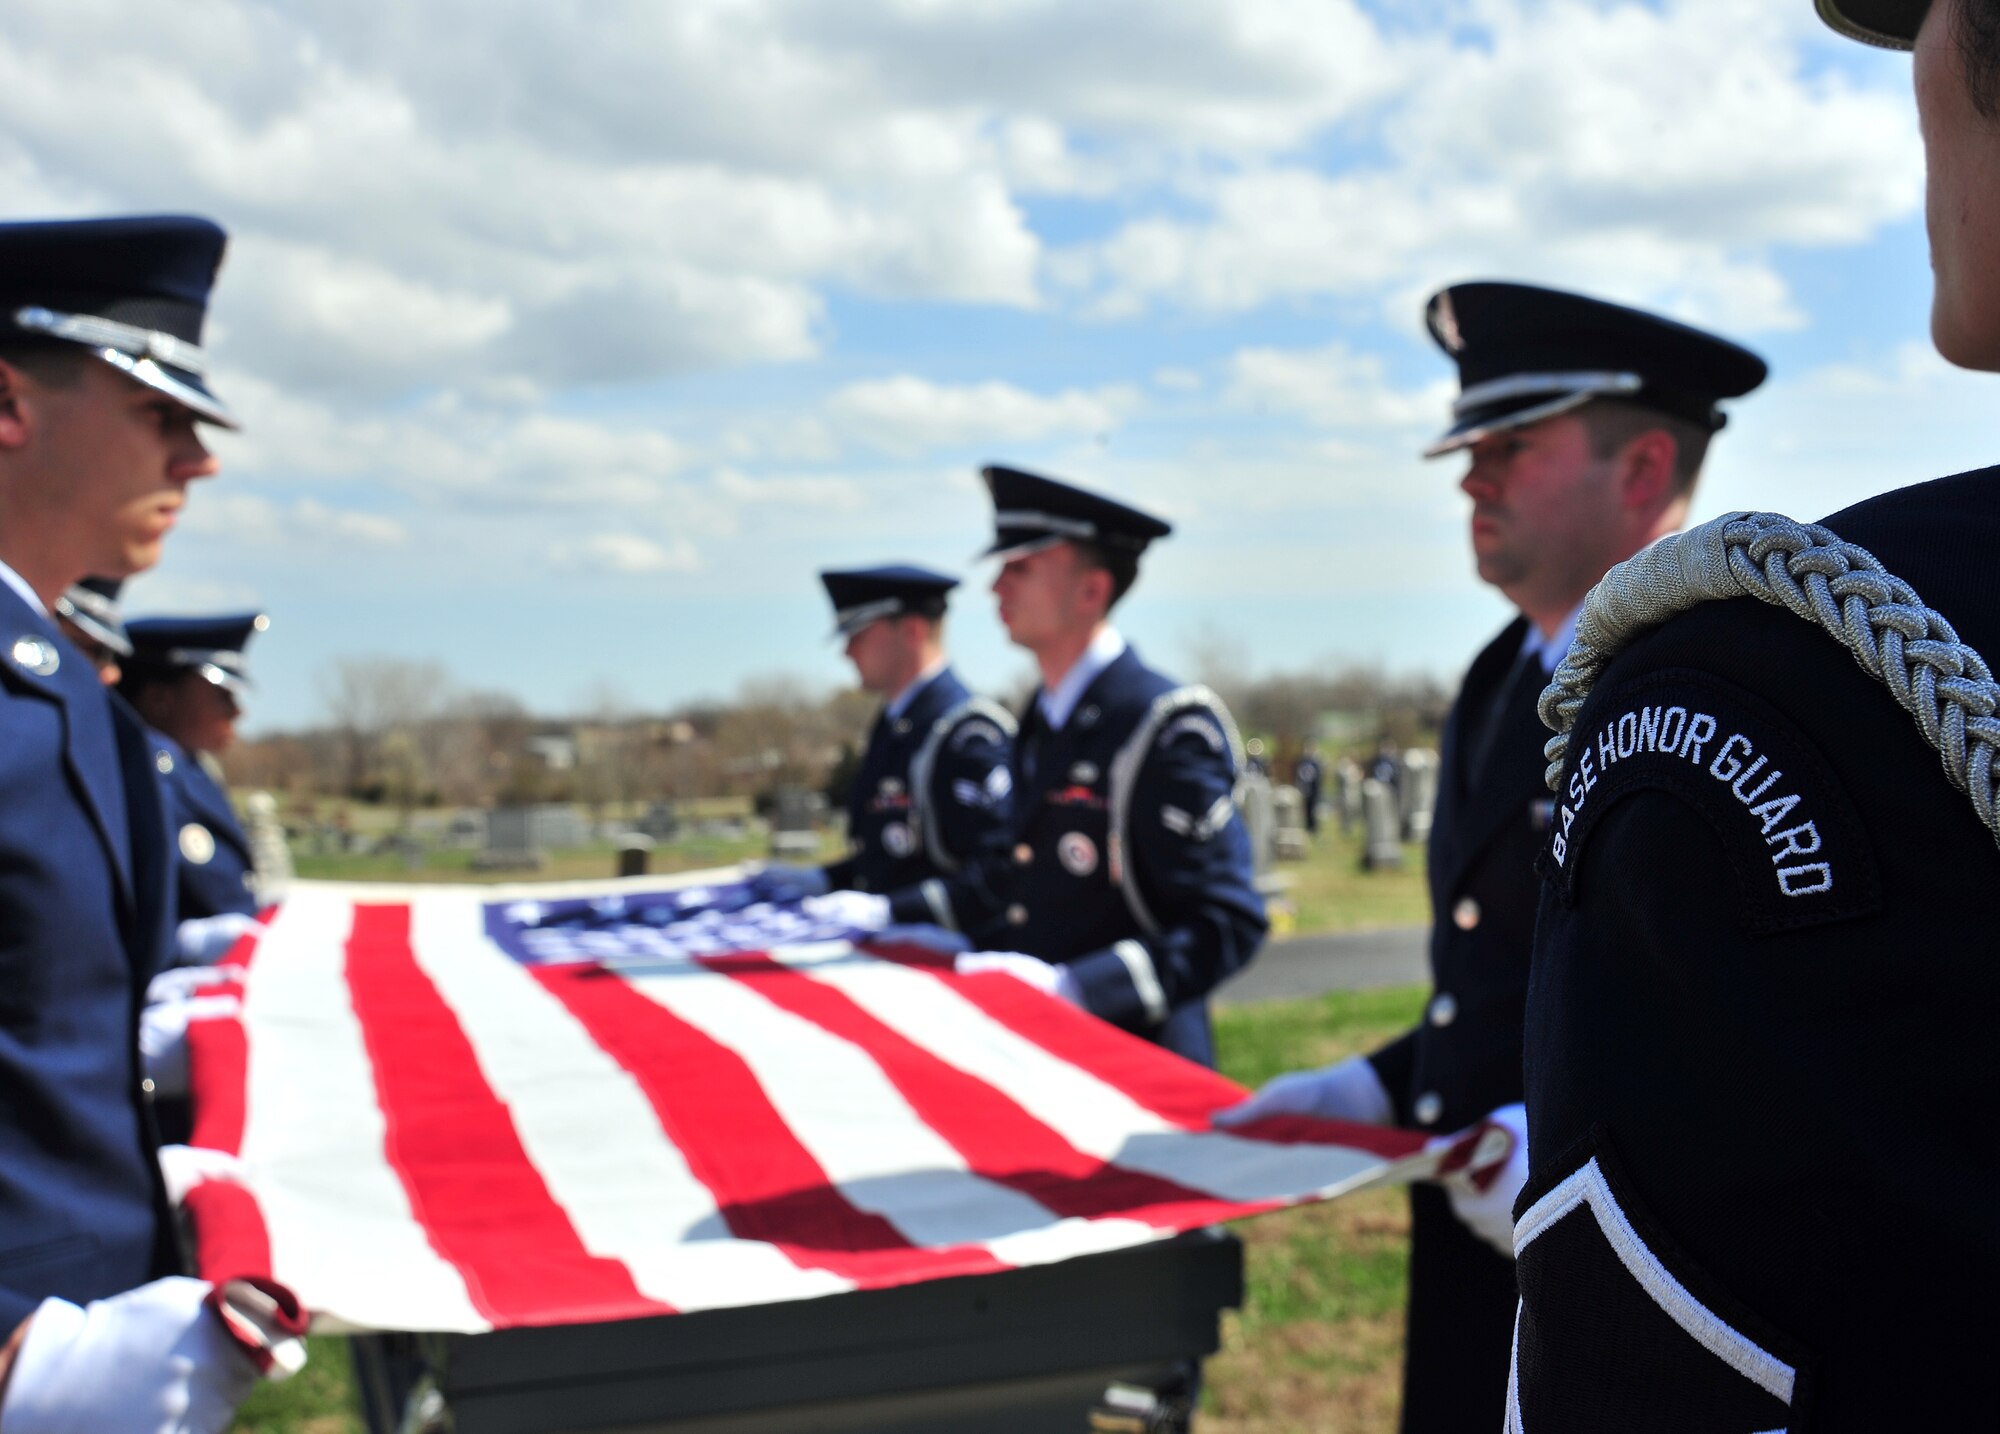 Members of Whiteman Honor Guard practice the procedures of a military funeral at Knob Noster cemetery in Knob Noster, Mo., March 15, 2016. Whiteman Honor Guard serves more than 100 counties spanning Missouri to Kansas covering more than 70,000 square miles across both states. Whiteman Honor Guard represents the respect each fallen service member deserves, and upholds traditions held dear to the armed forces. (U.S. Air Force photo by Airman 1st Class Jovan Banks)